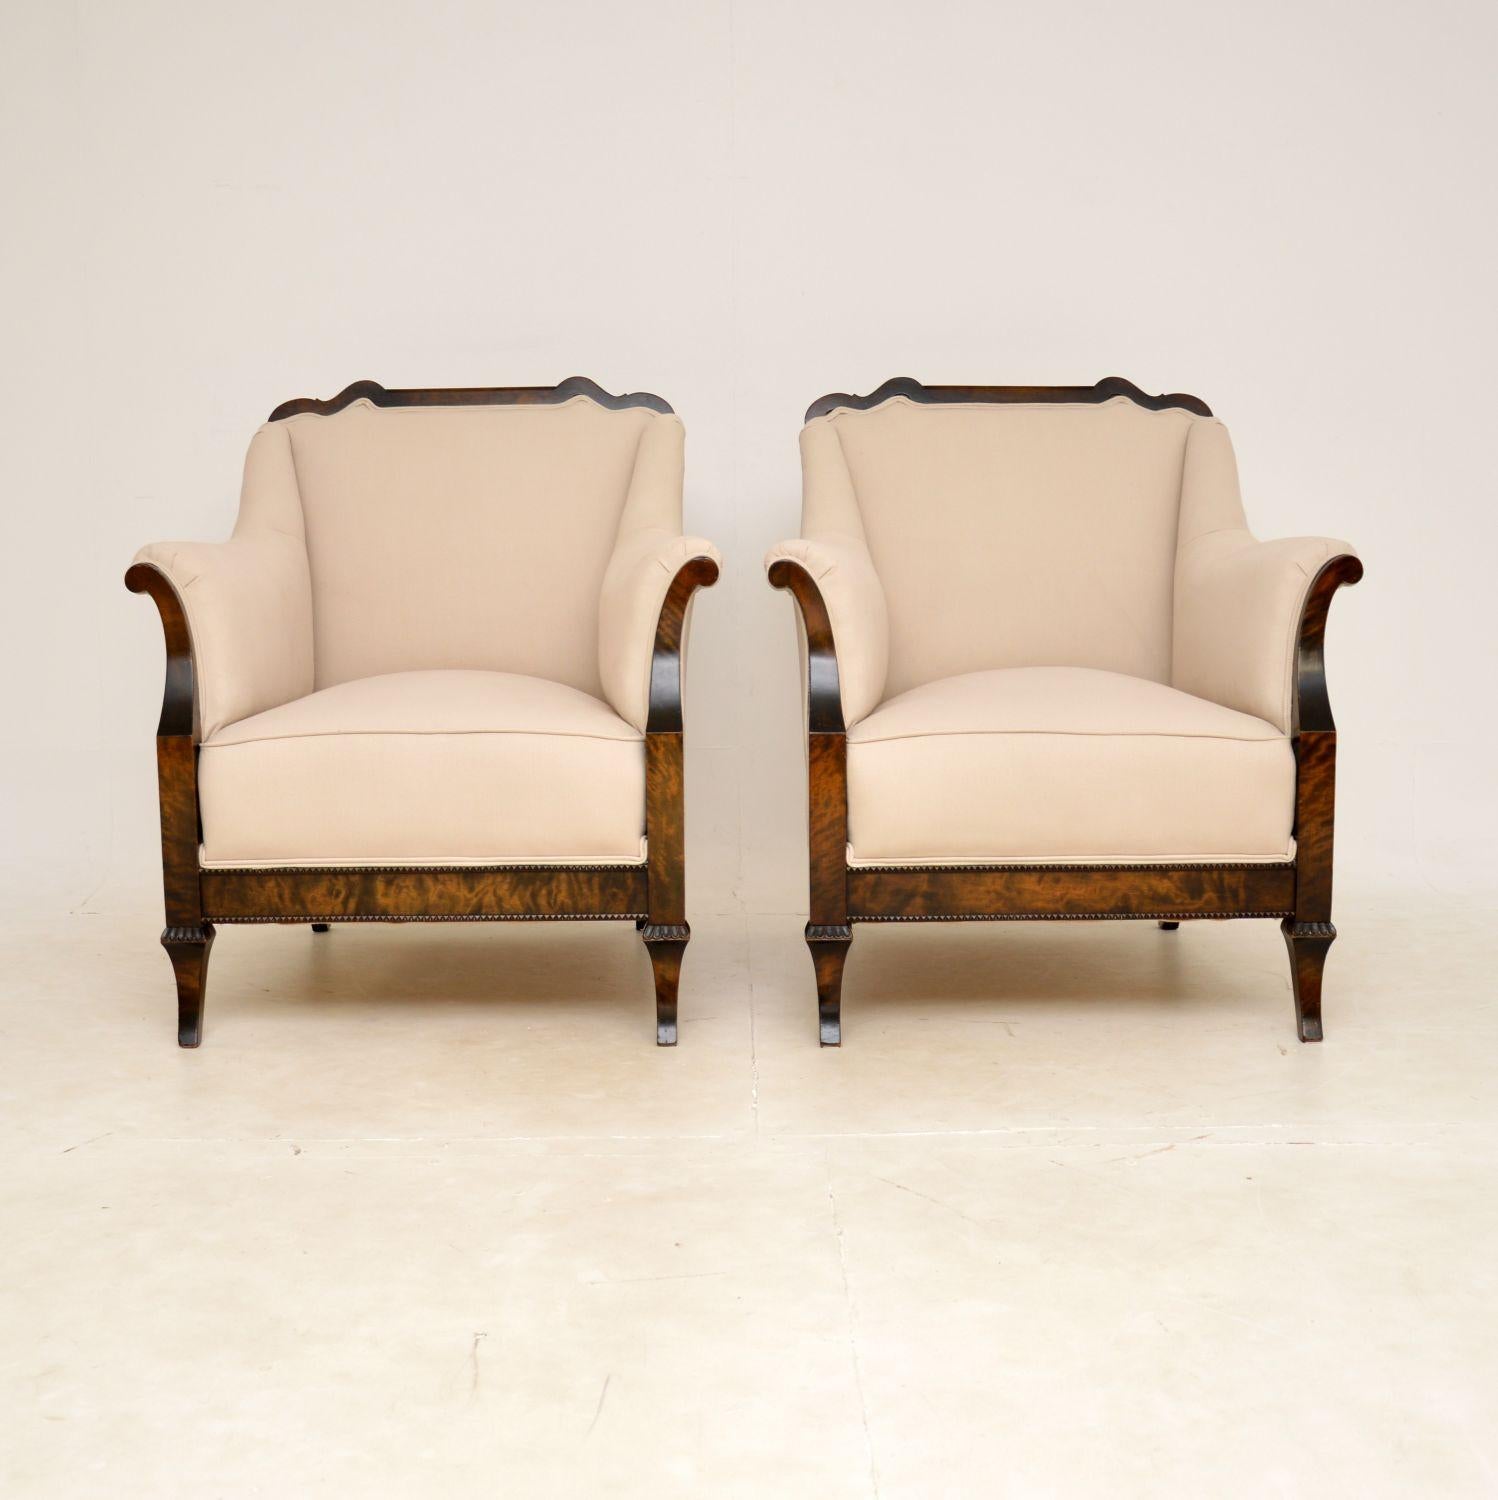 A large and impressive pair of antique Swedish armchairs in satin birch. They were recently imported from Sweden, they date from around the 1900-1920 period.

The quality is outstanding, they are generous, well sprung and very comfortable. The